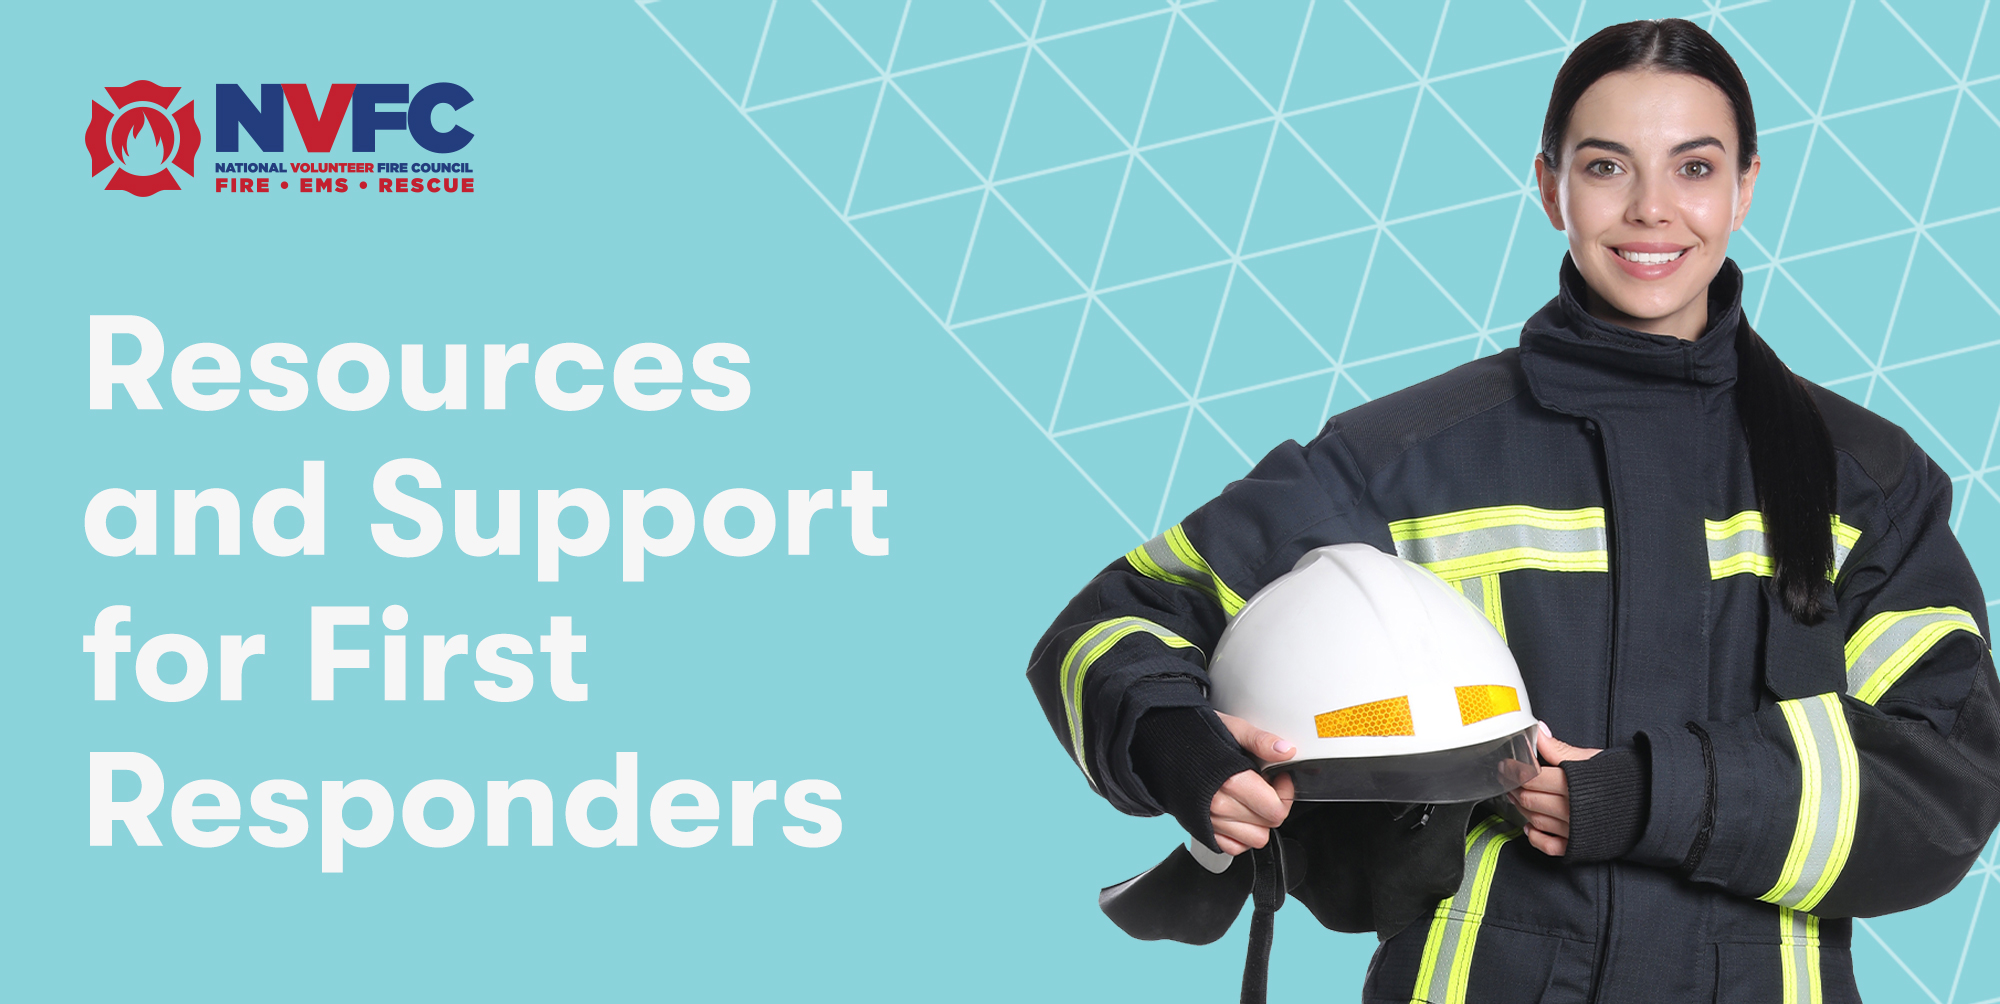 Find Out How The NVFC Supports First Responders